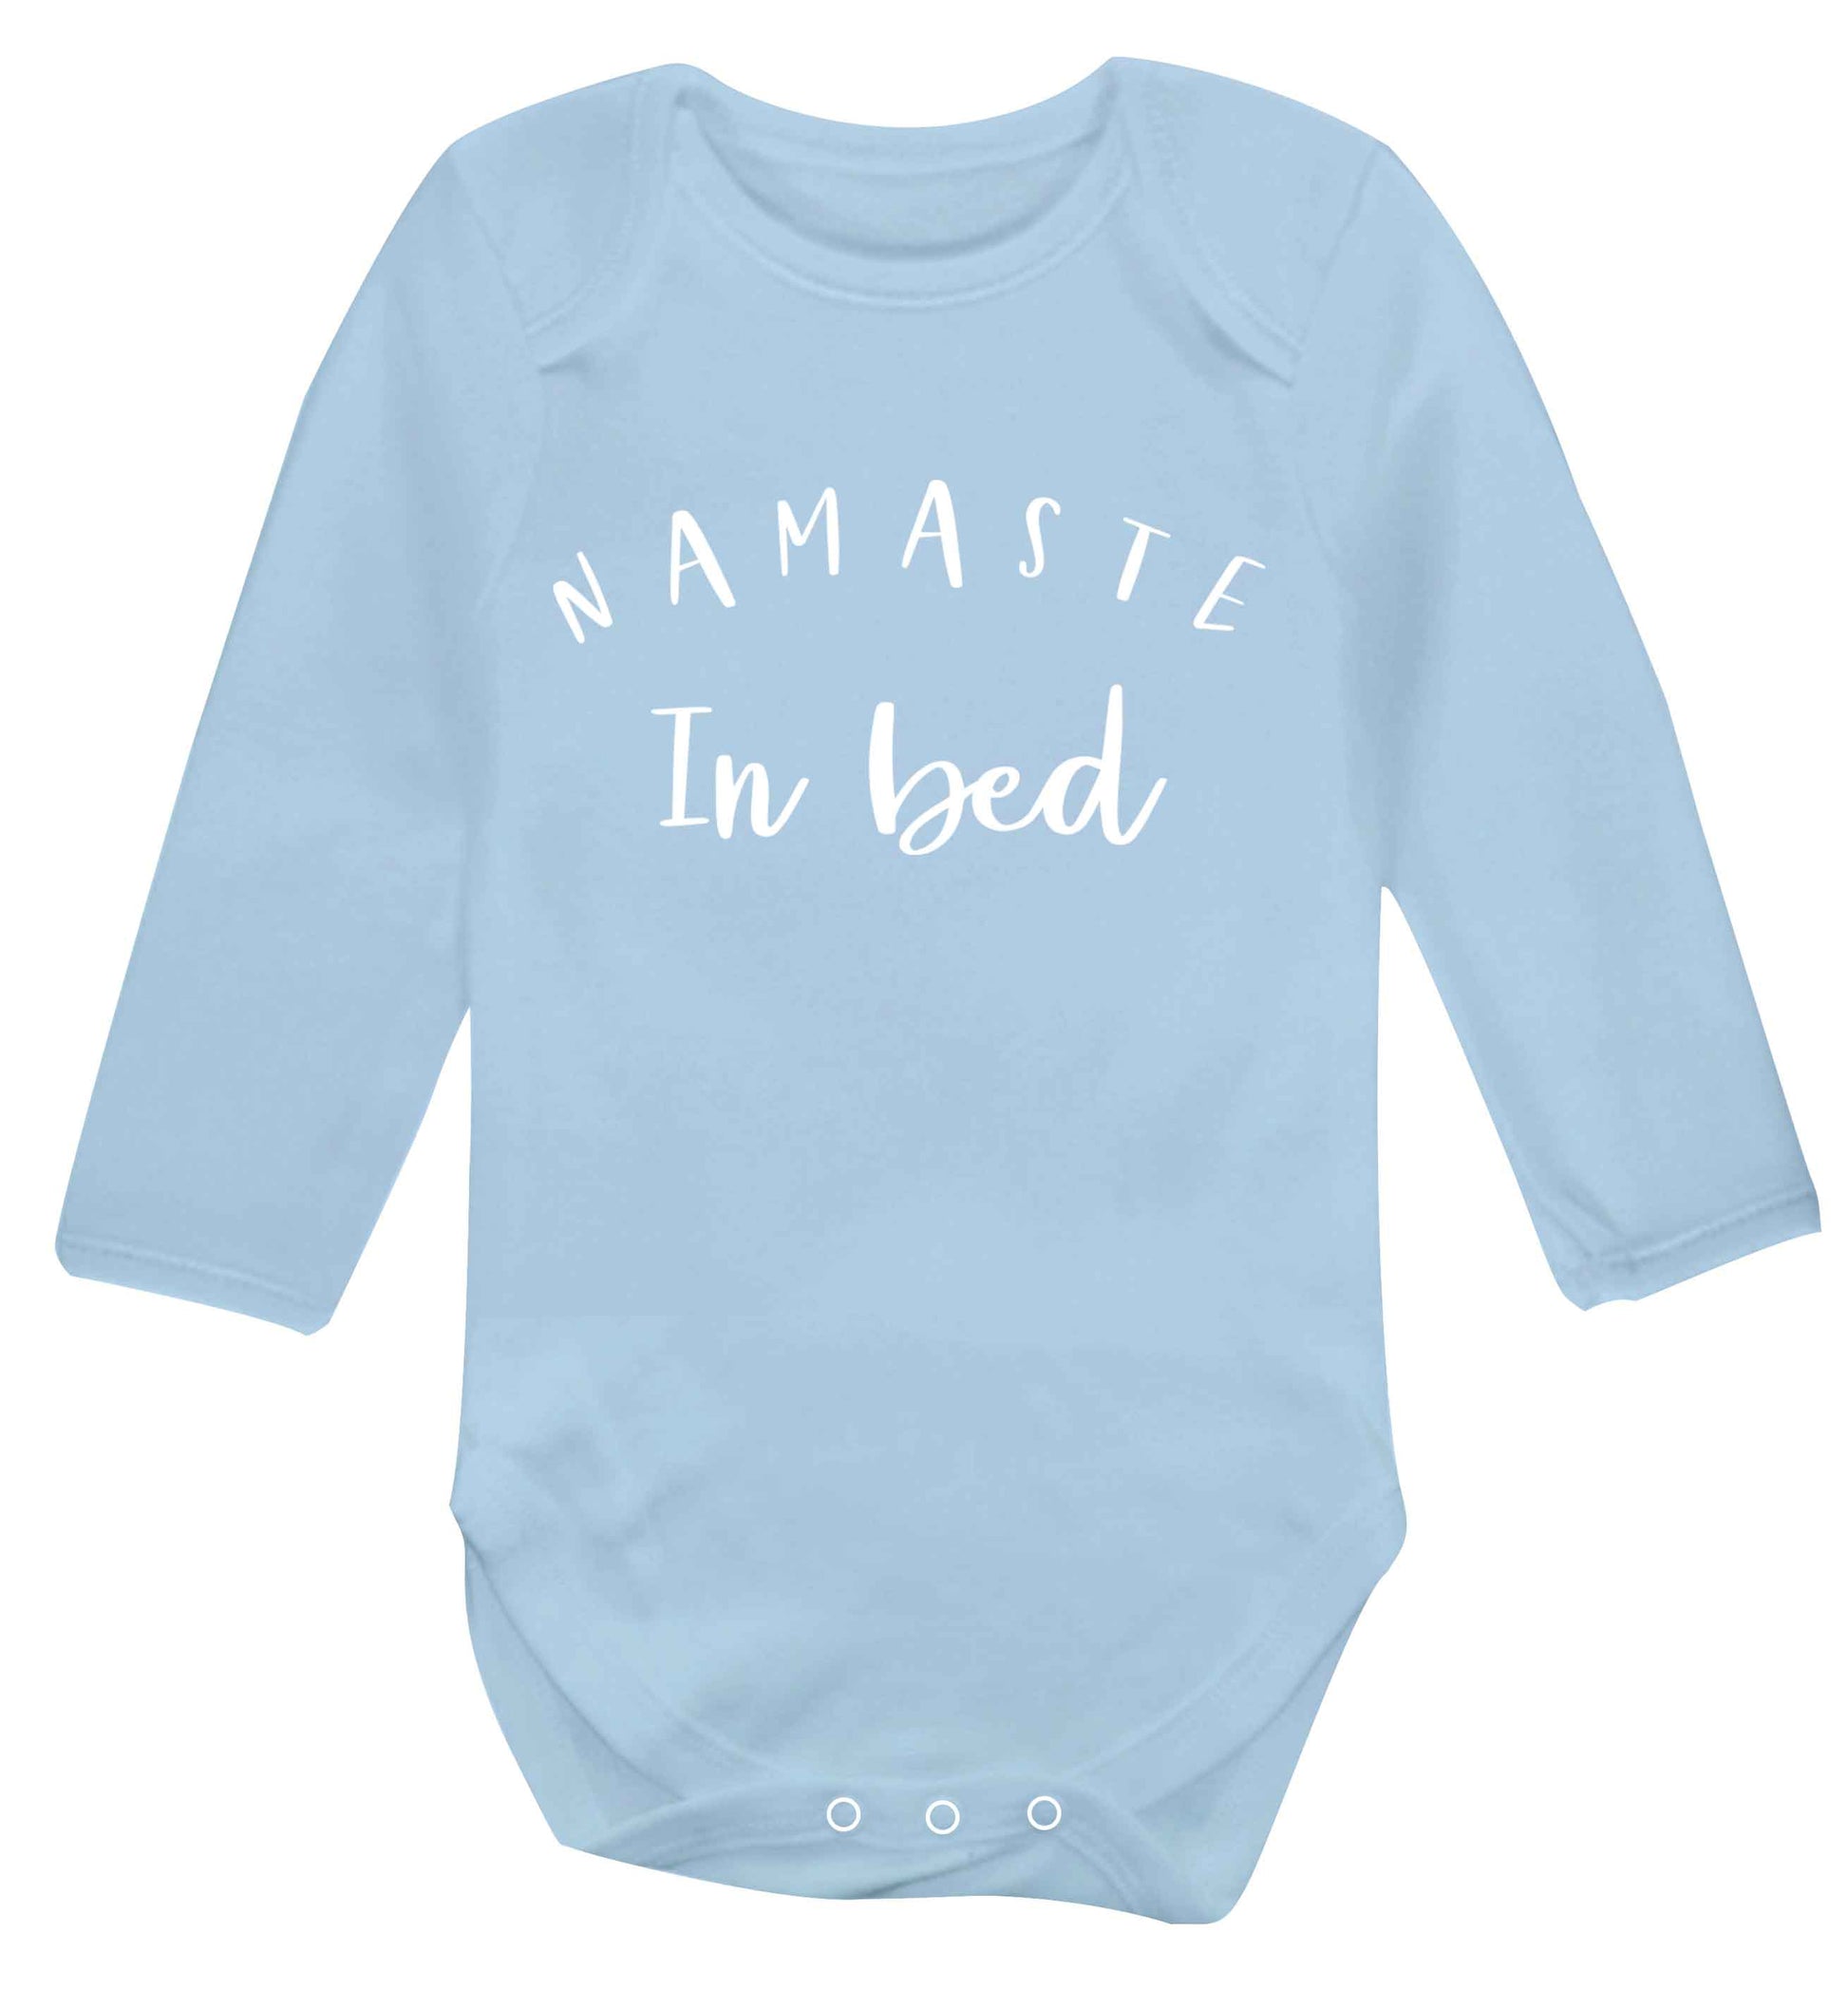 Namaste in bed Baby Vest long sleeved pale blue 6-12 months